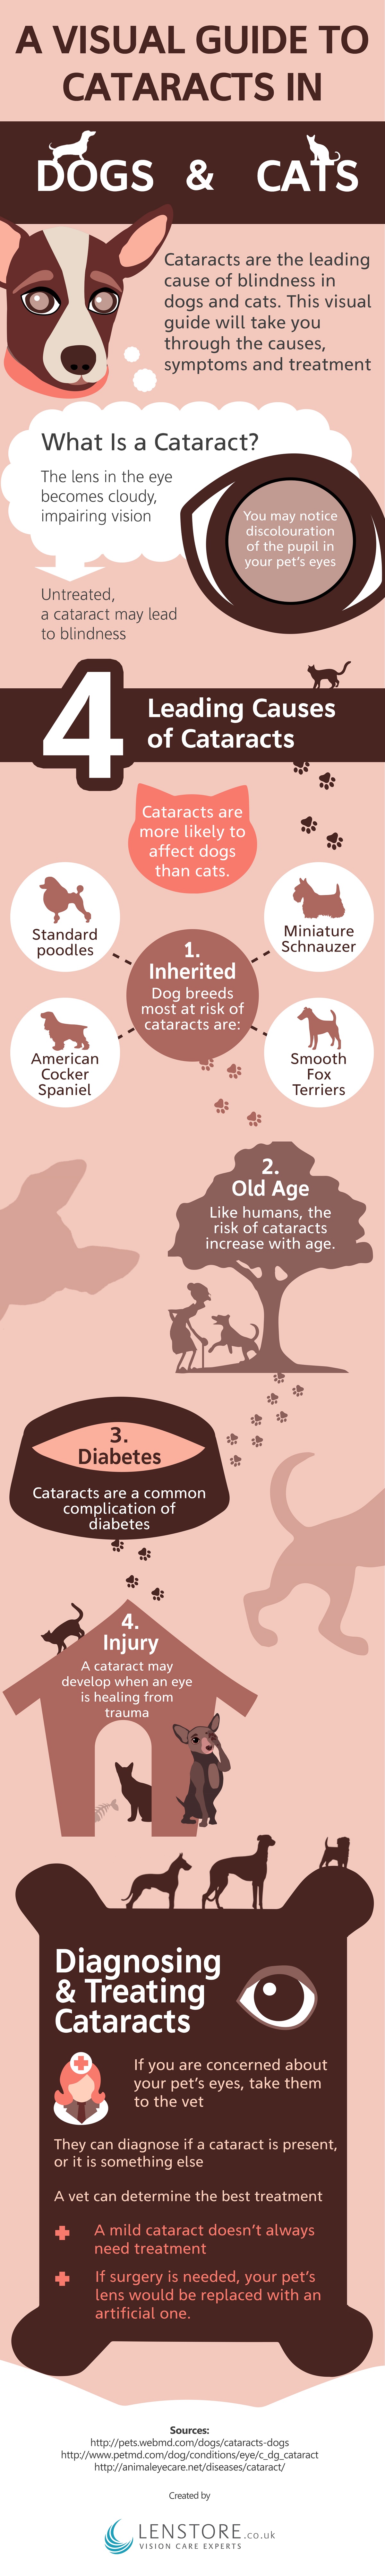 Cataracts in dogs and cats infographic